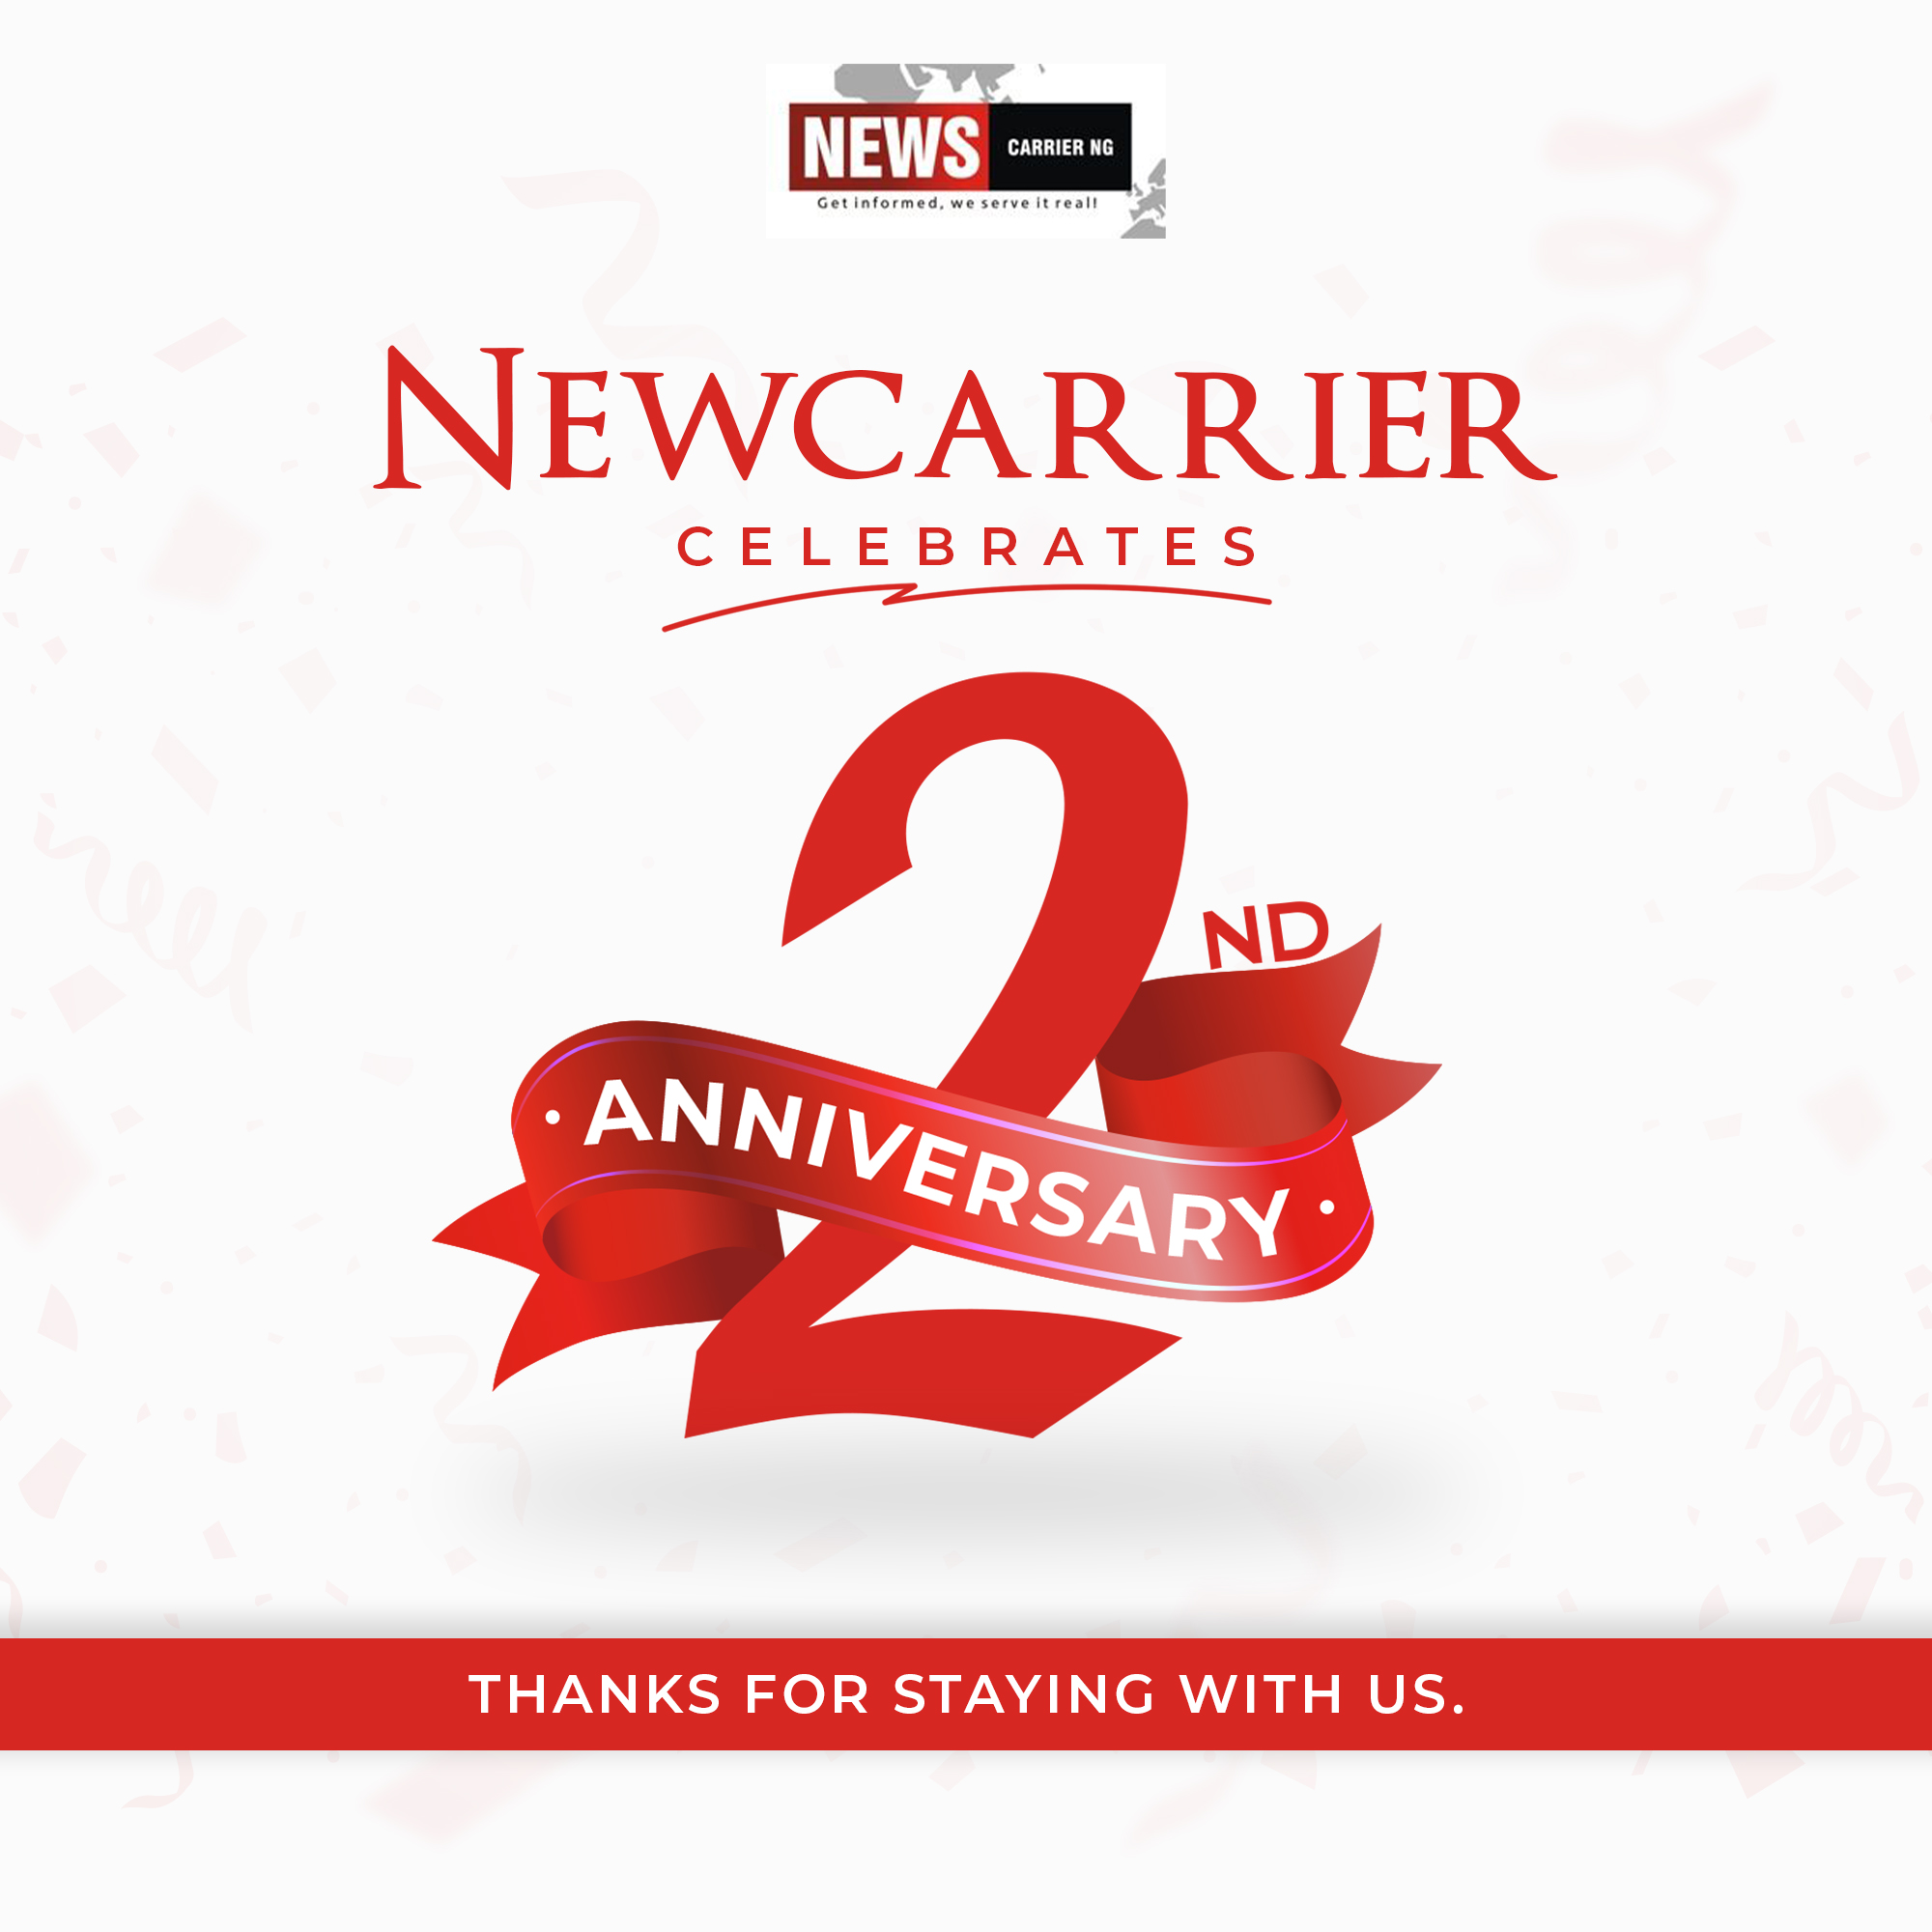 Newscarrier 2 years ads banner